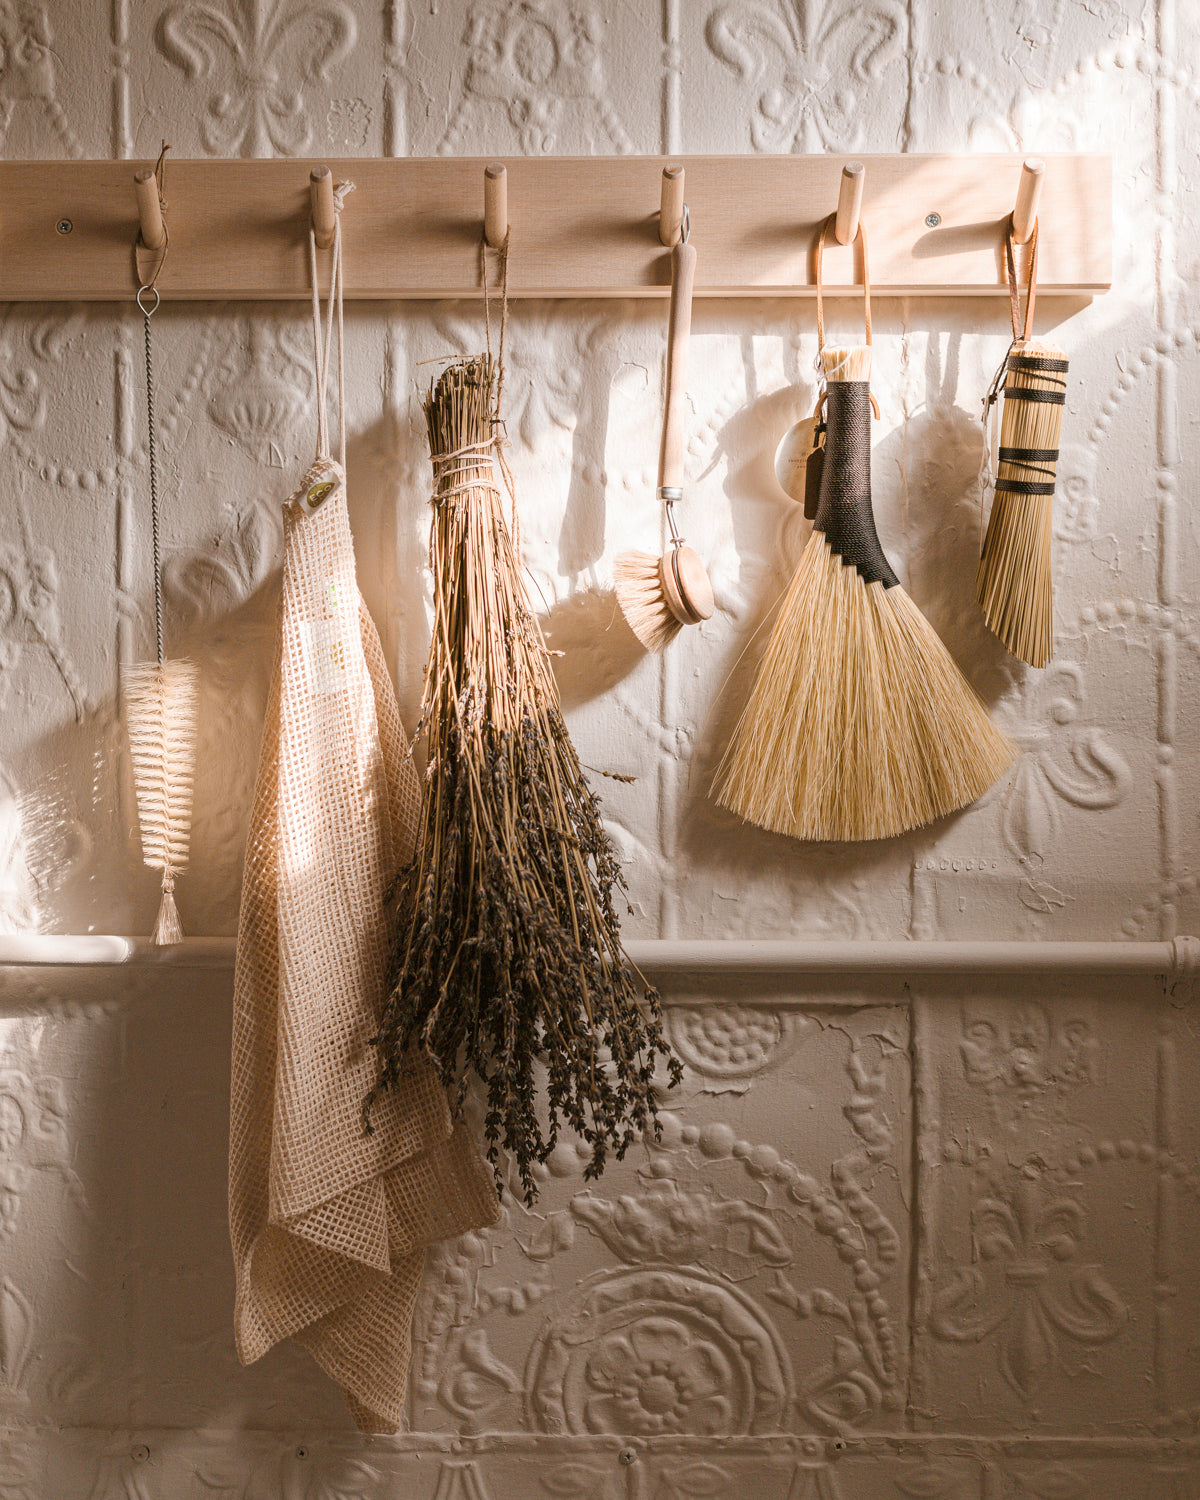 Narrow and long bottle cleaning brushes shown hanging on a wall-mounted peg rail 